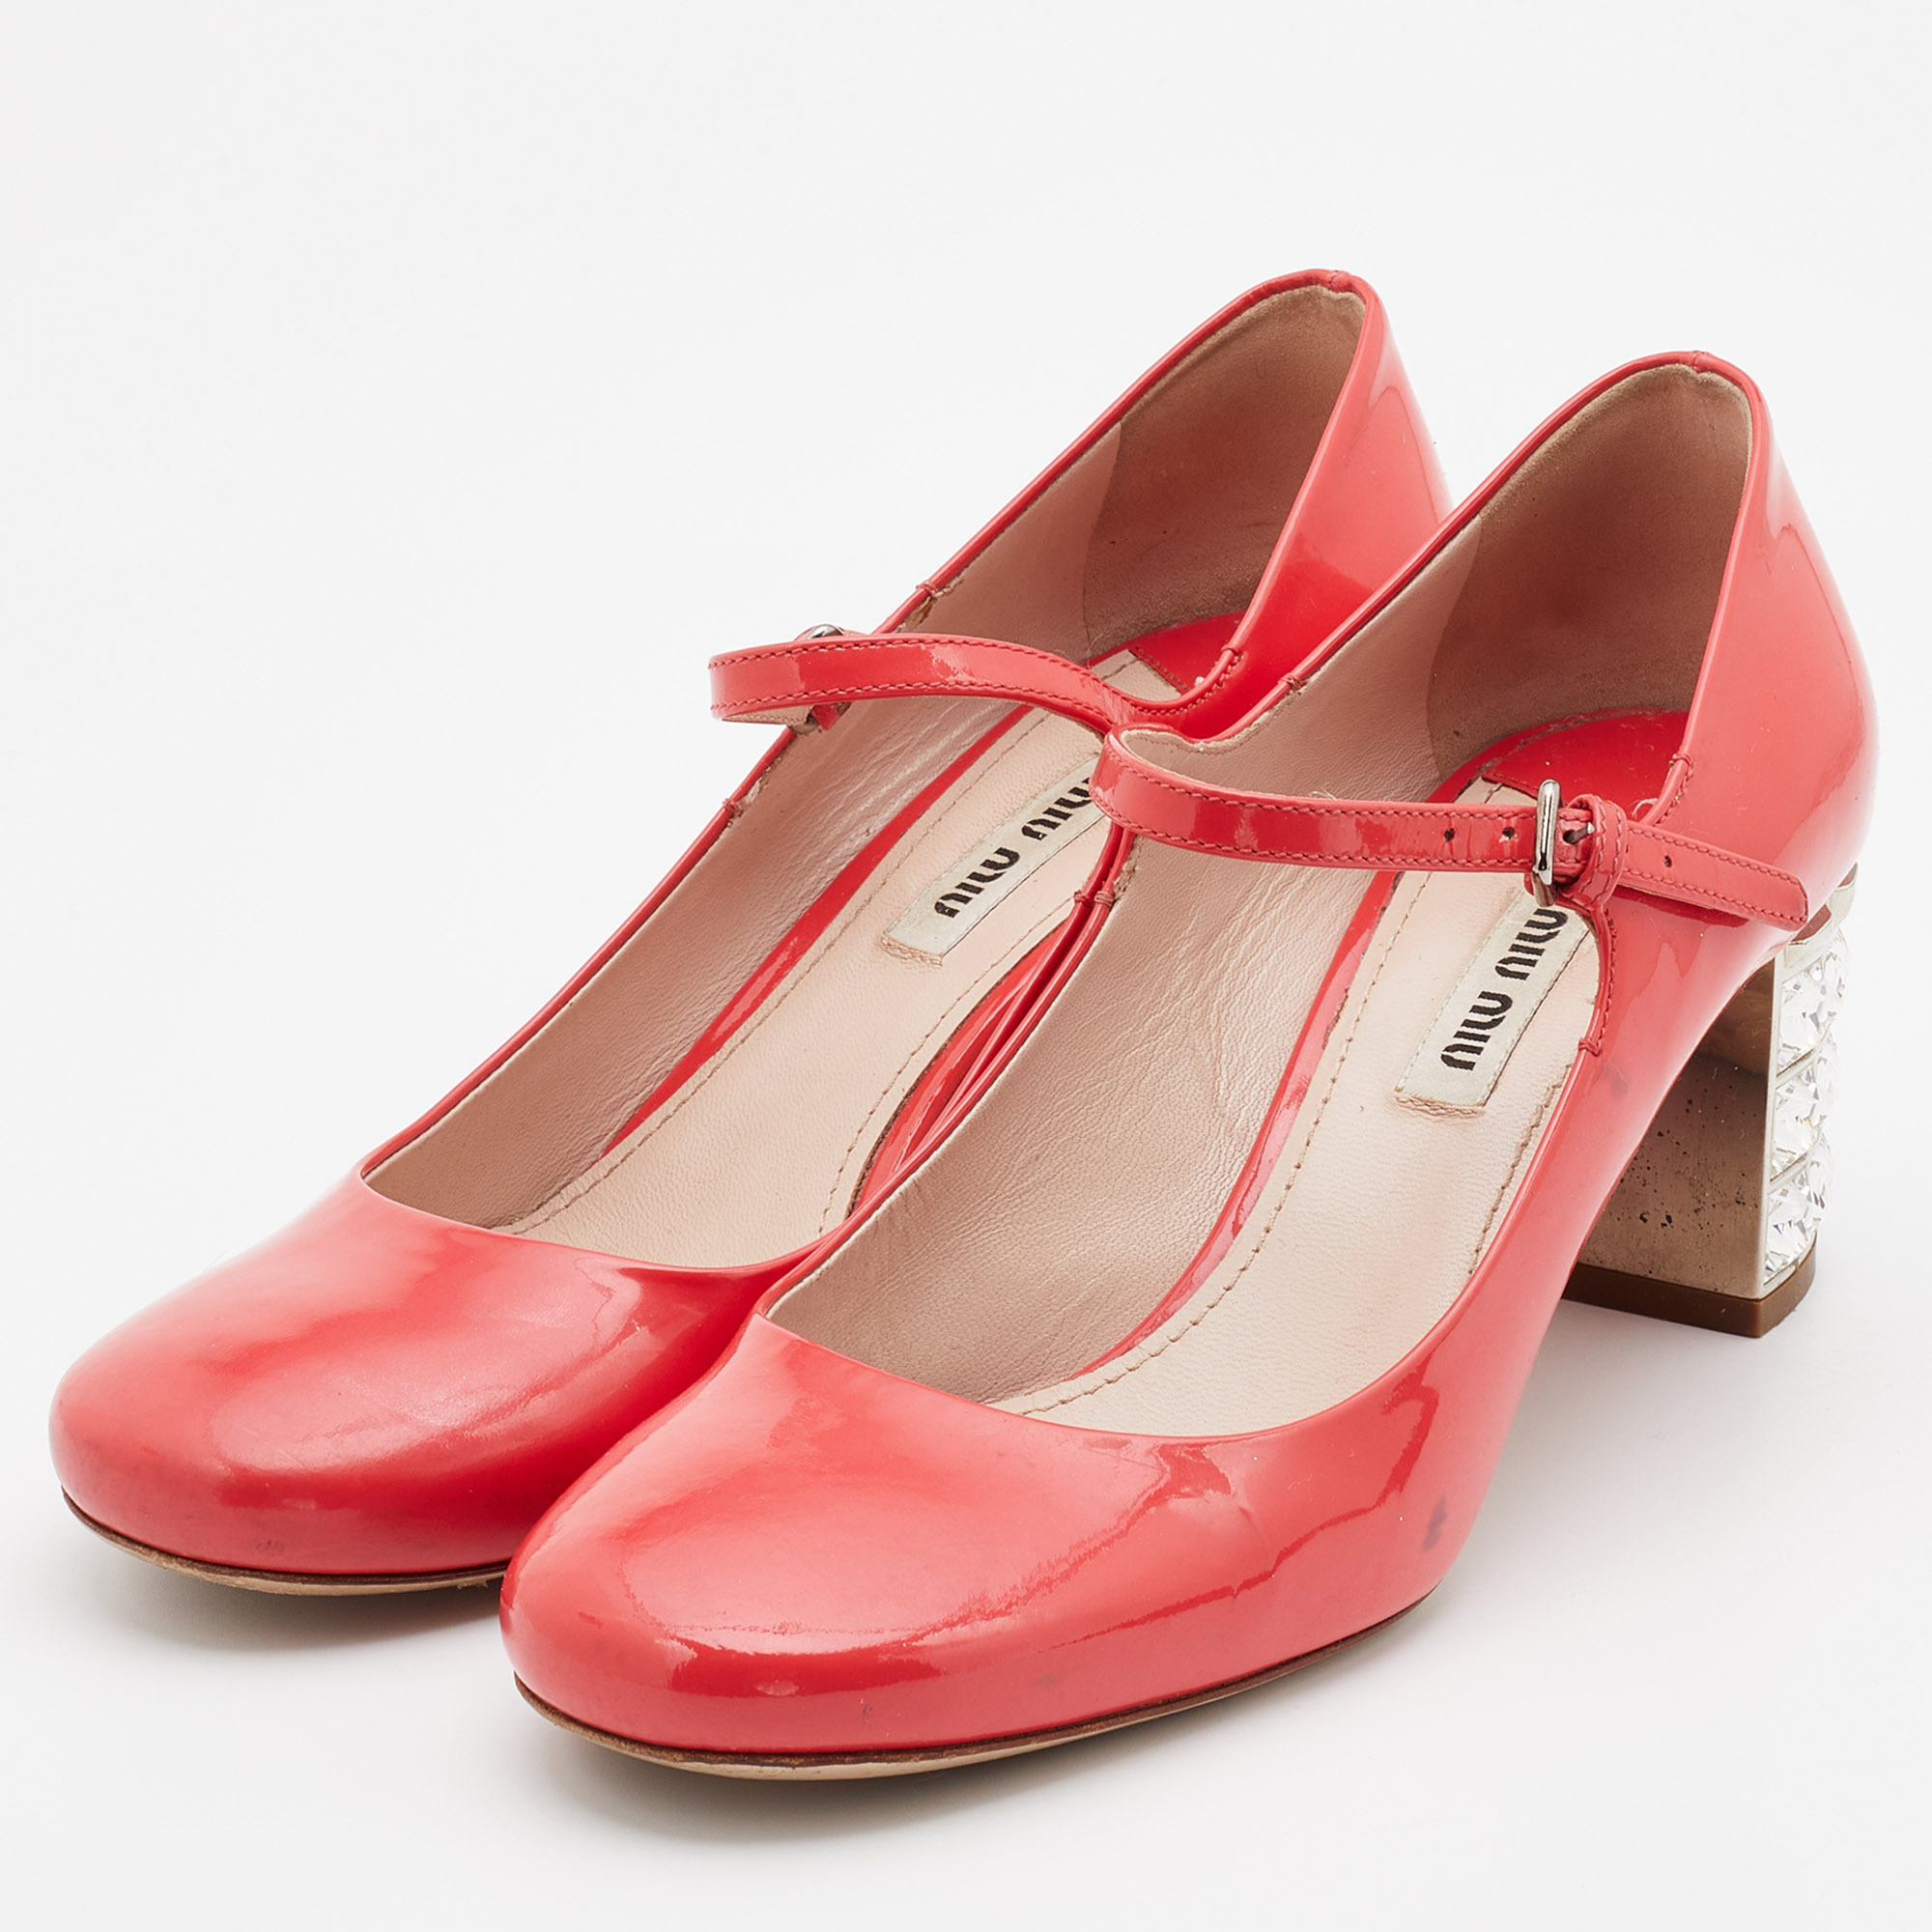 

Miu Miu Coral Pink Patent Leather Crystal Embellished Block Heel Mary Jane Pumps Size